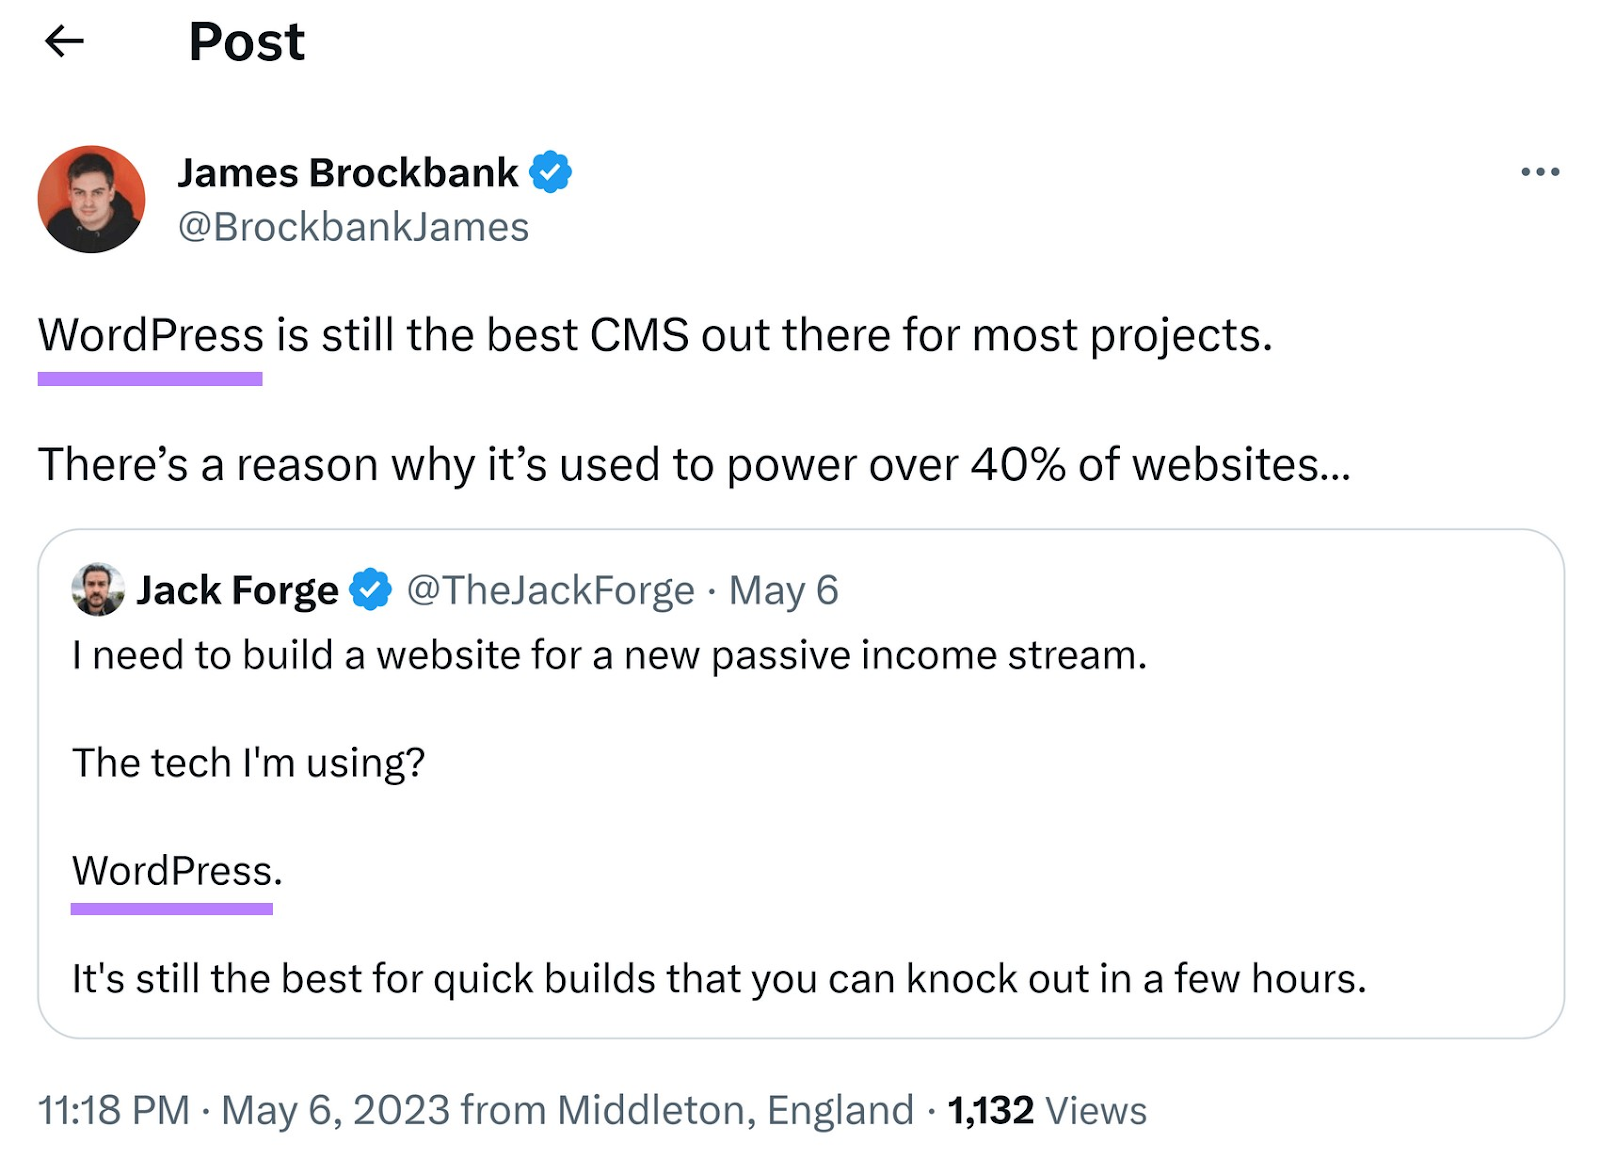 an example of a X post from James Brockbank mentioning WordPress